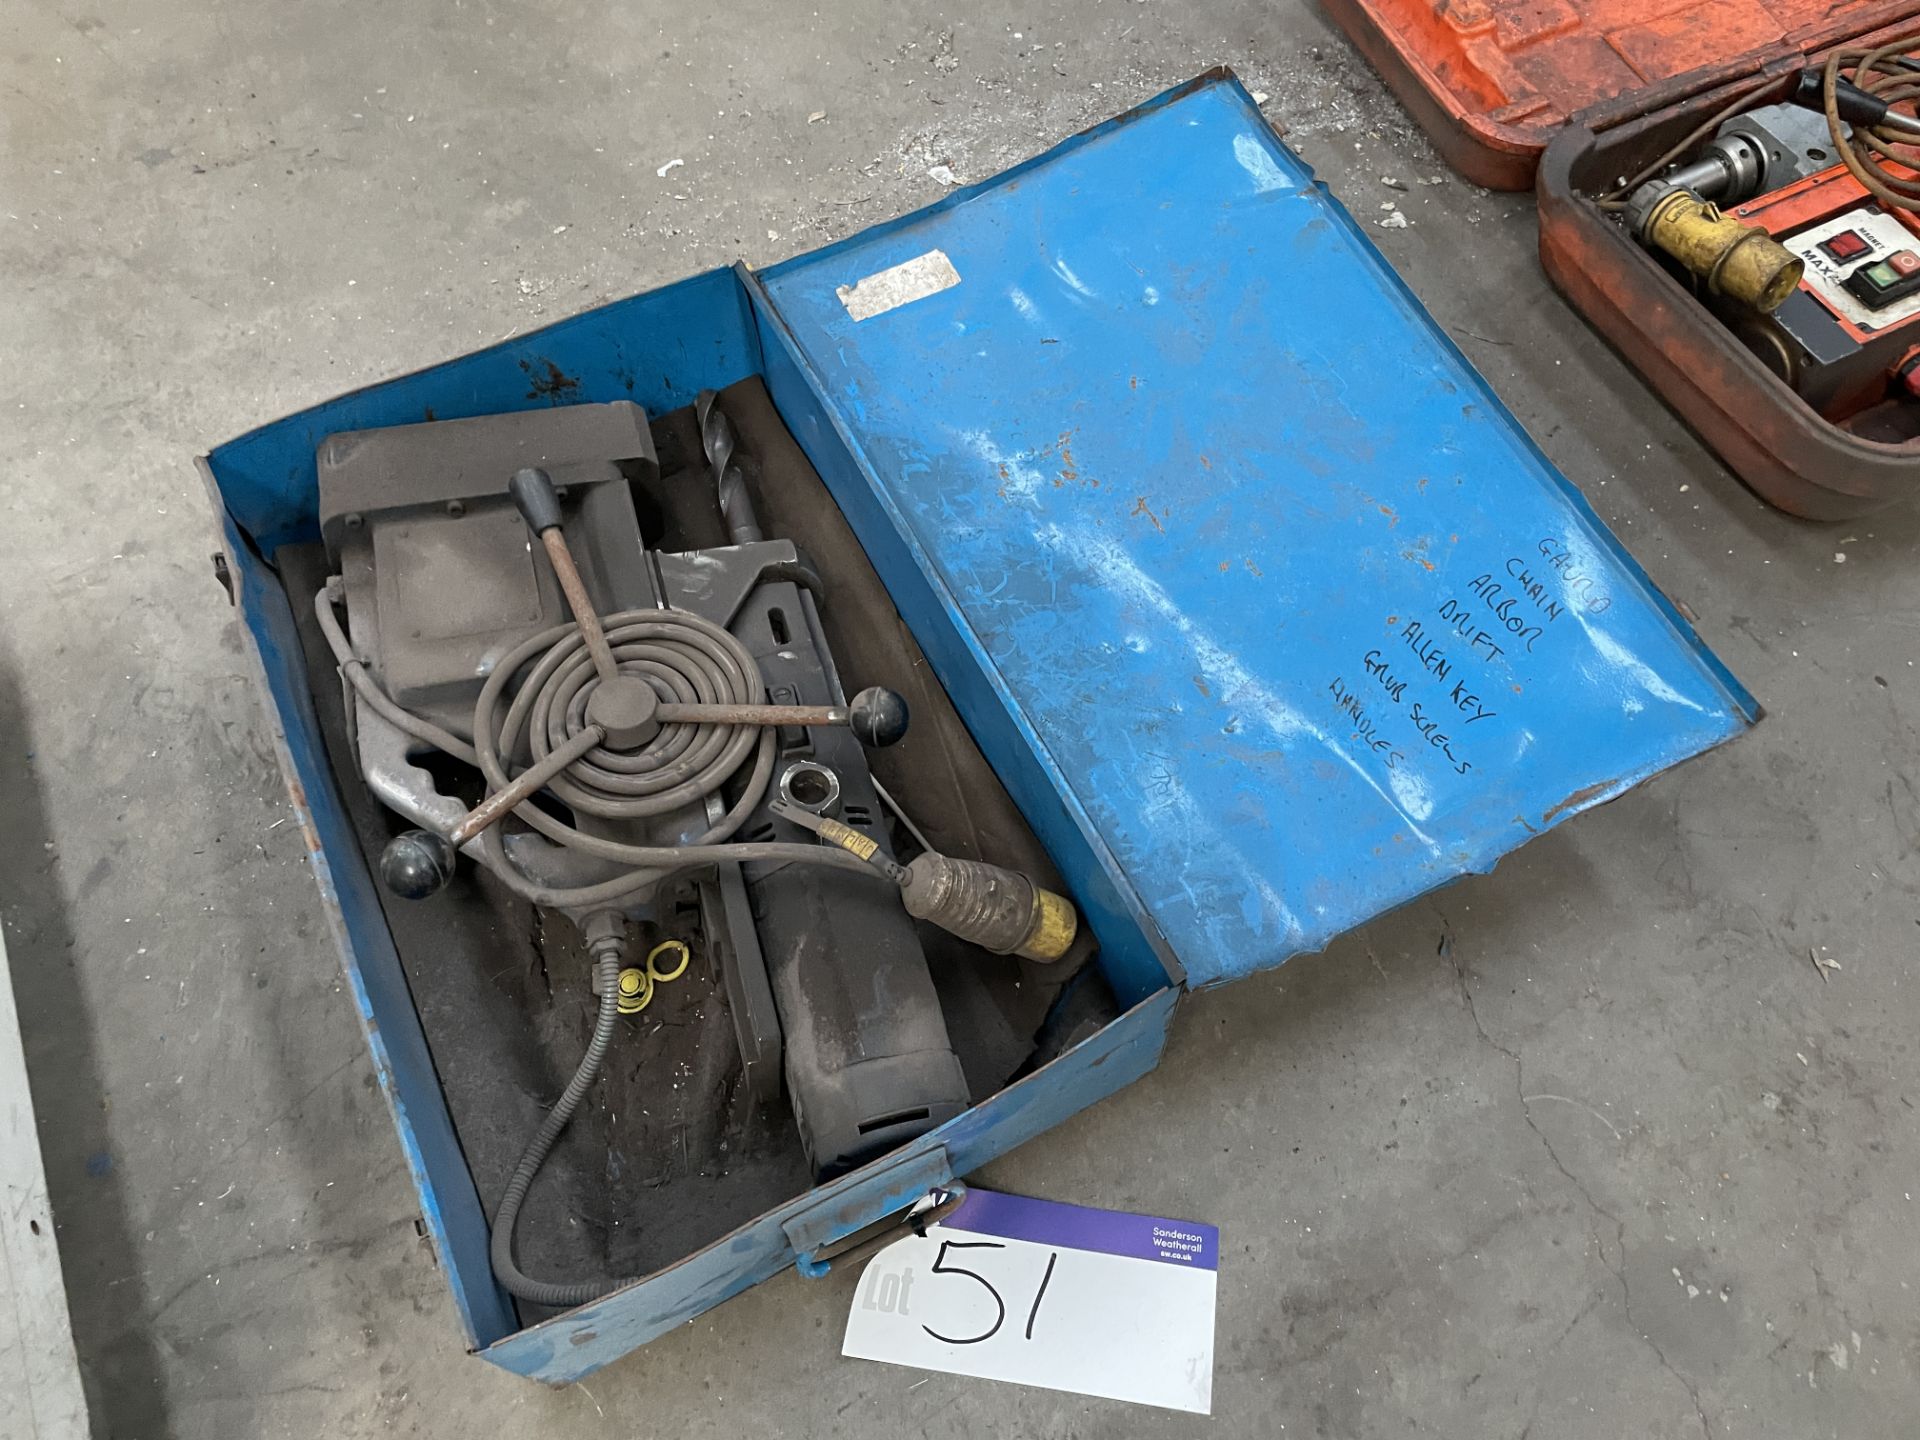 Magnetic Drill Stand, with drill, 110V and case, lot located at Ocean Raw Ltd & Jalna Construction